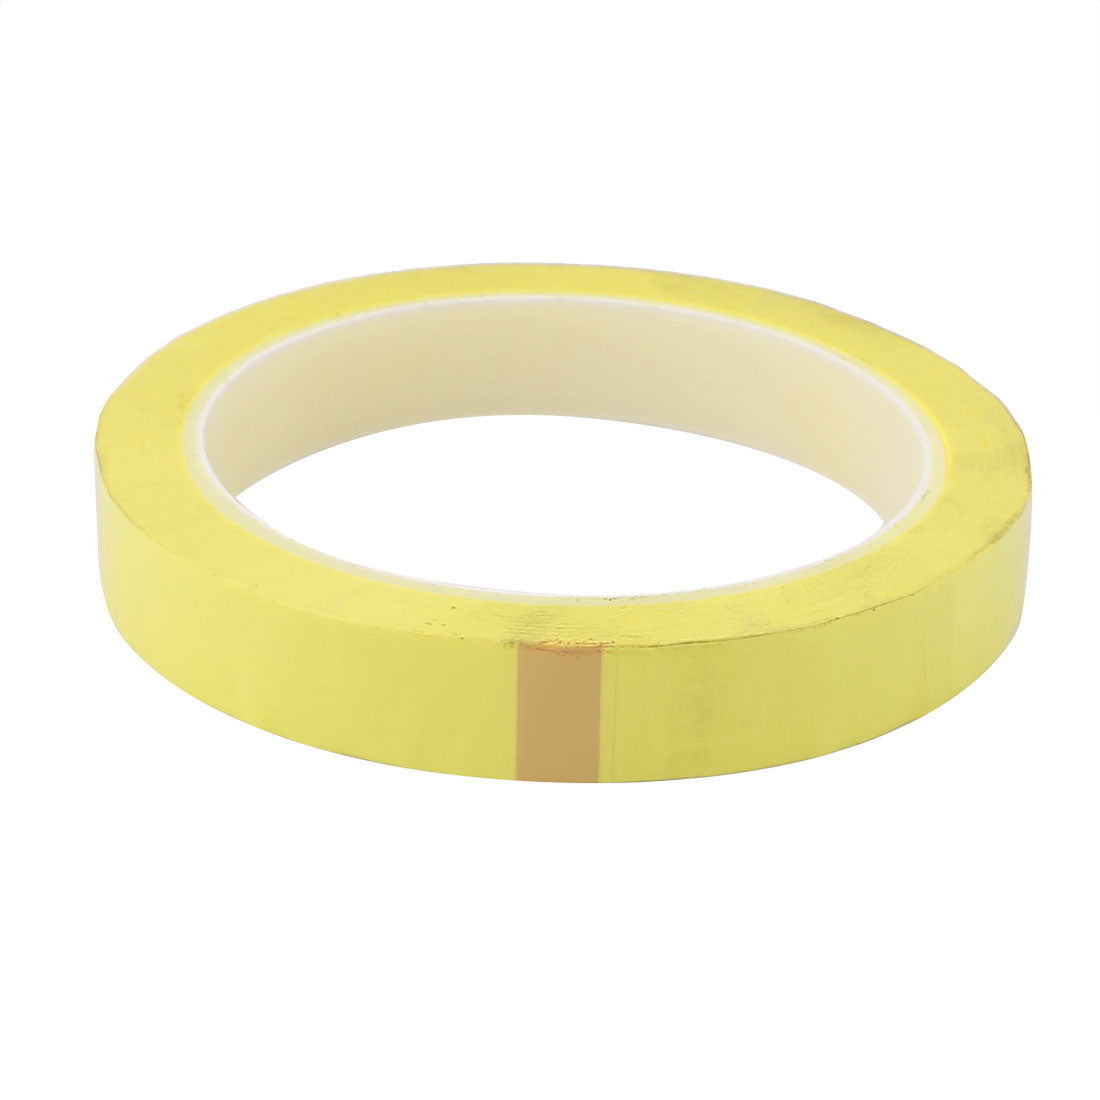 uxcell Uxcell 15mm Single Sided Strong Self Adhesive Mylar Tape 50M Length Yellow